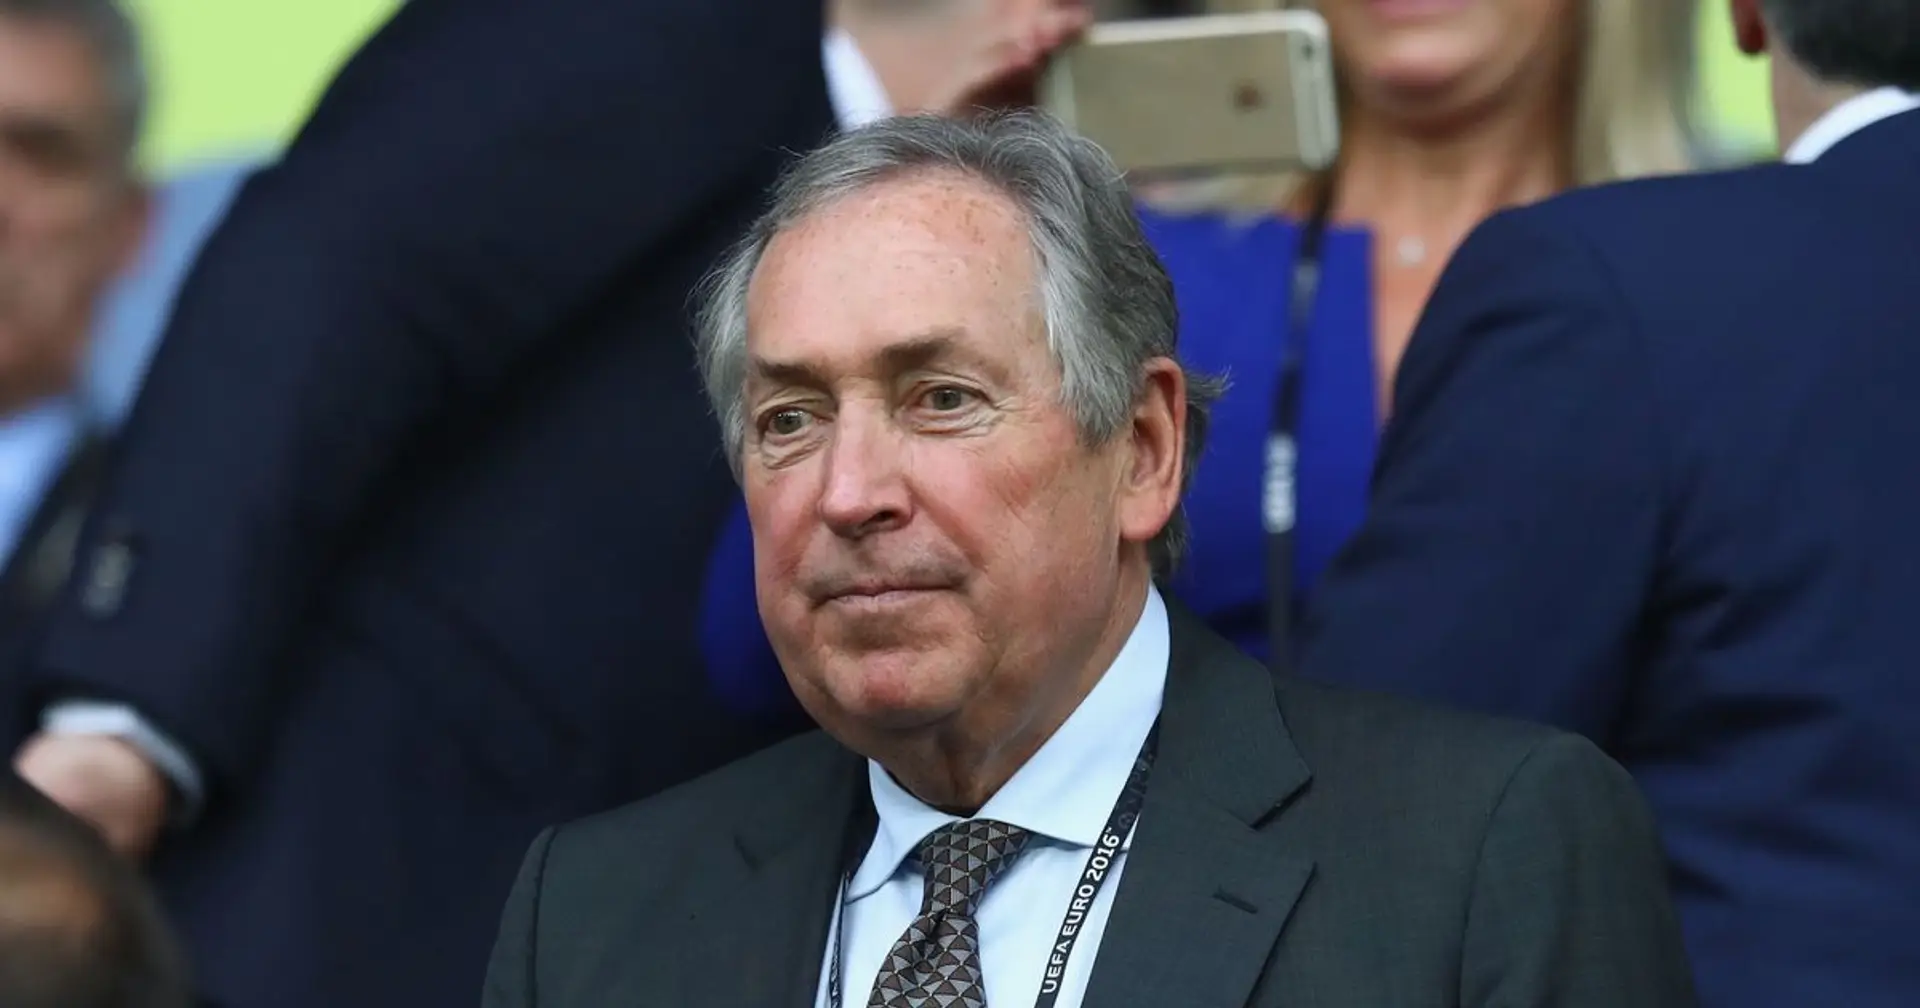 Gerard Houllier passes away aged 73